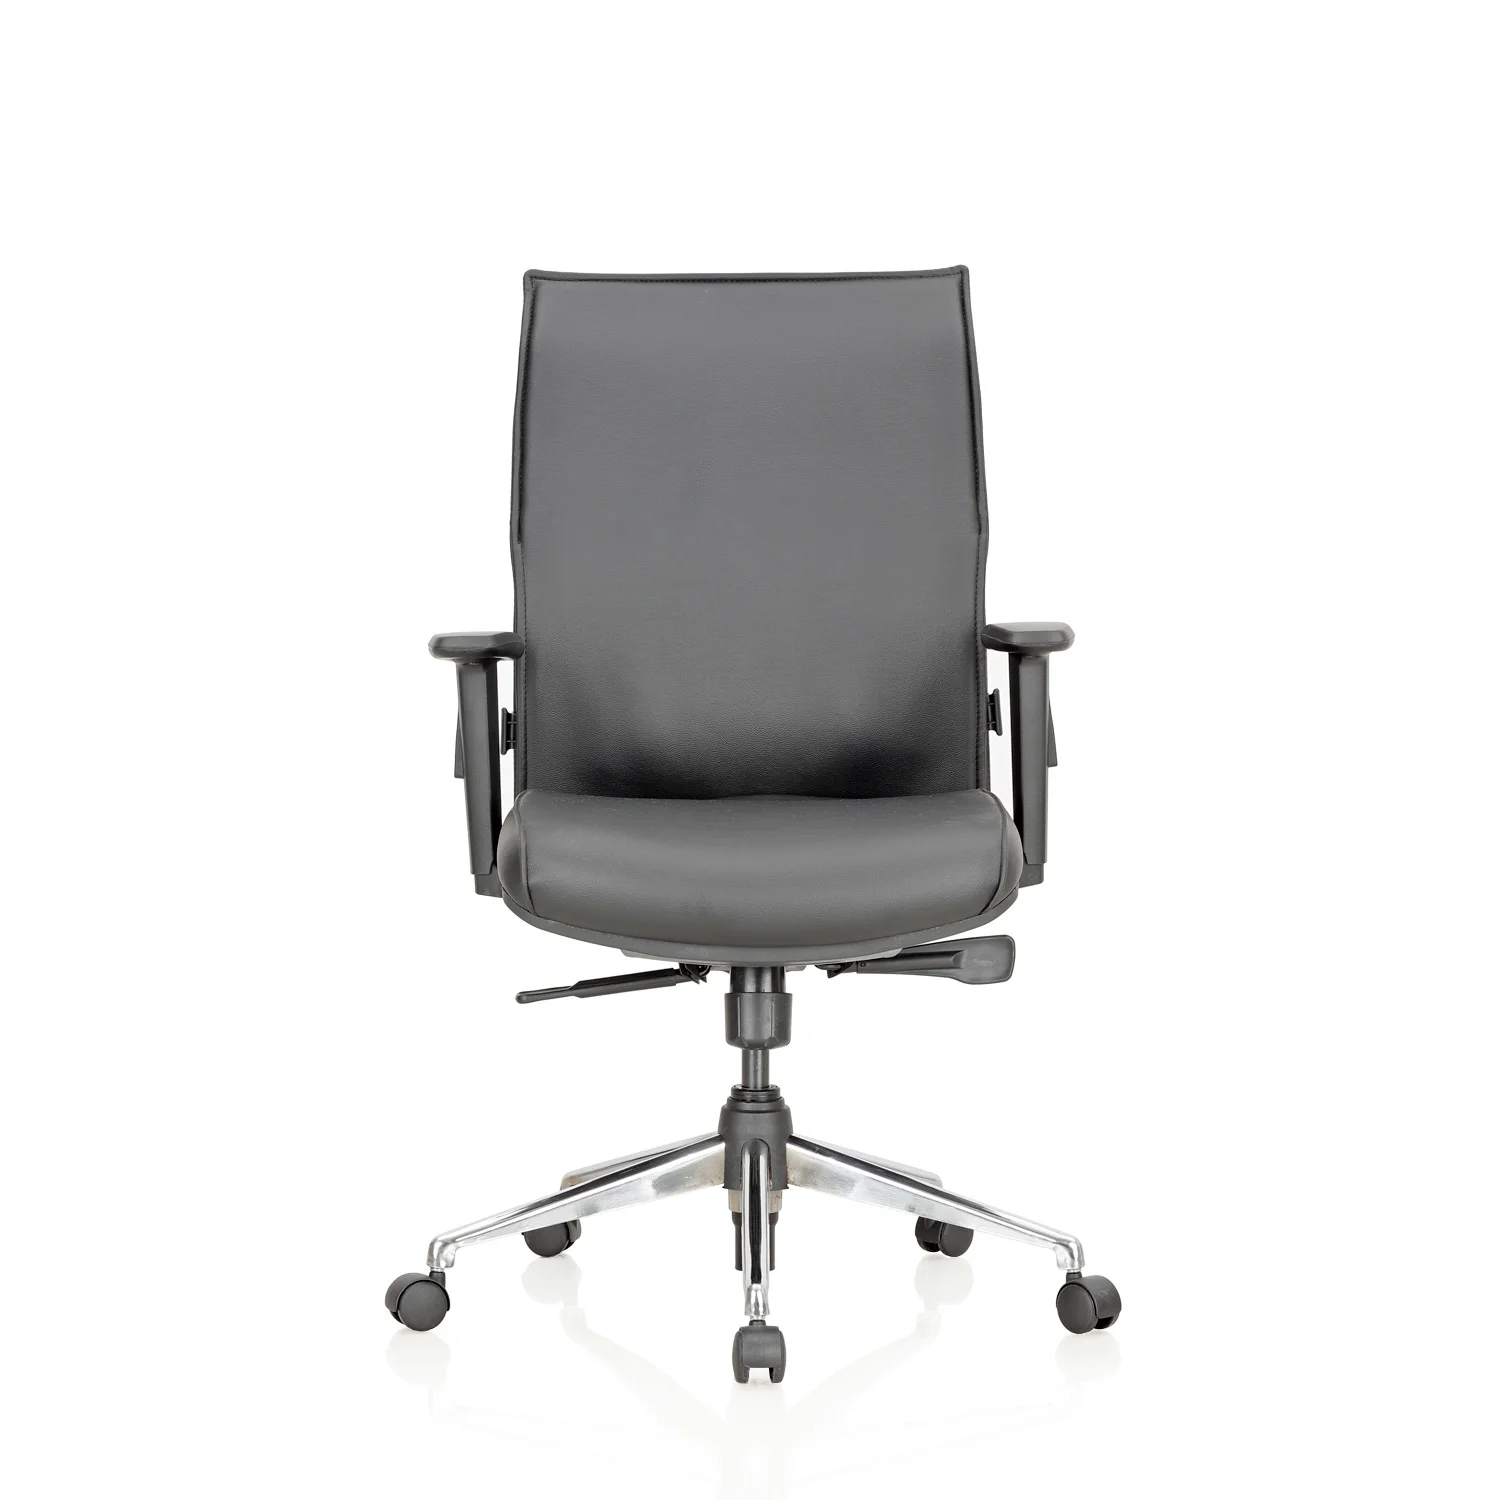 FP Invention Medium Back Leatherette Chair